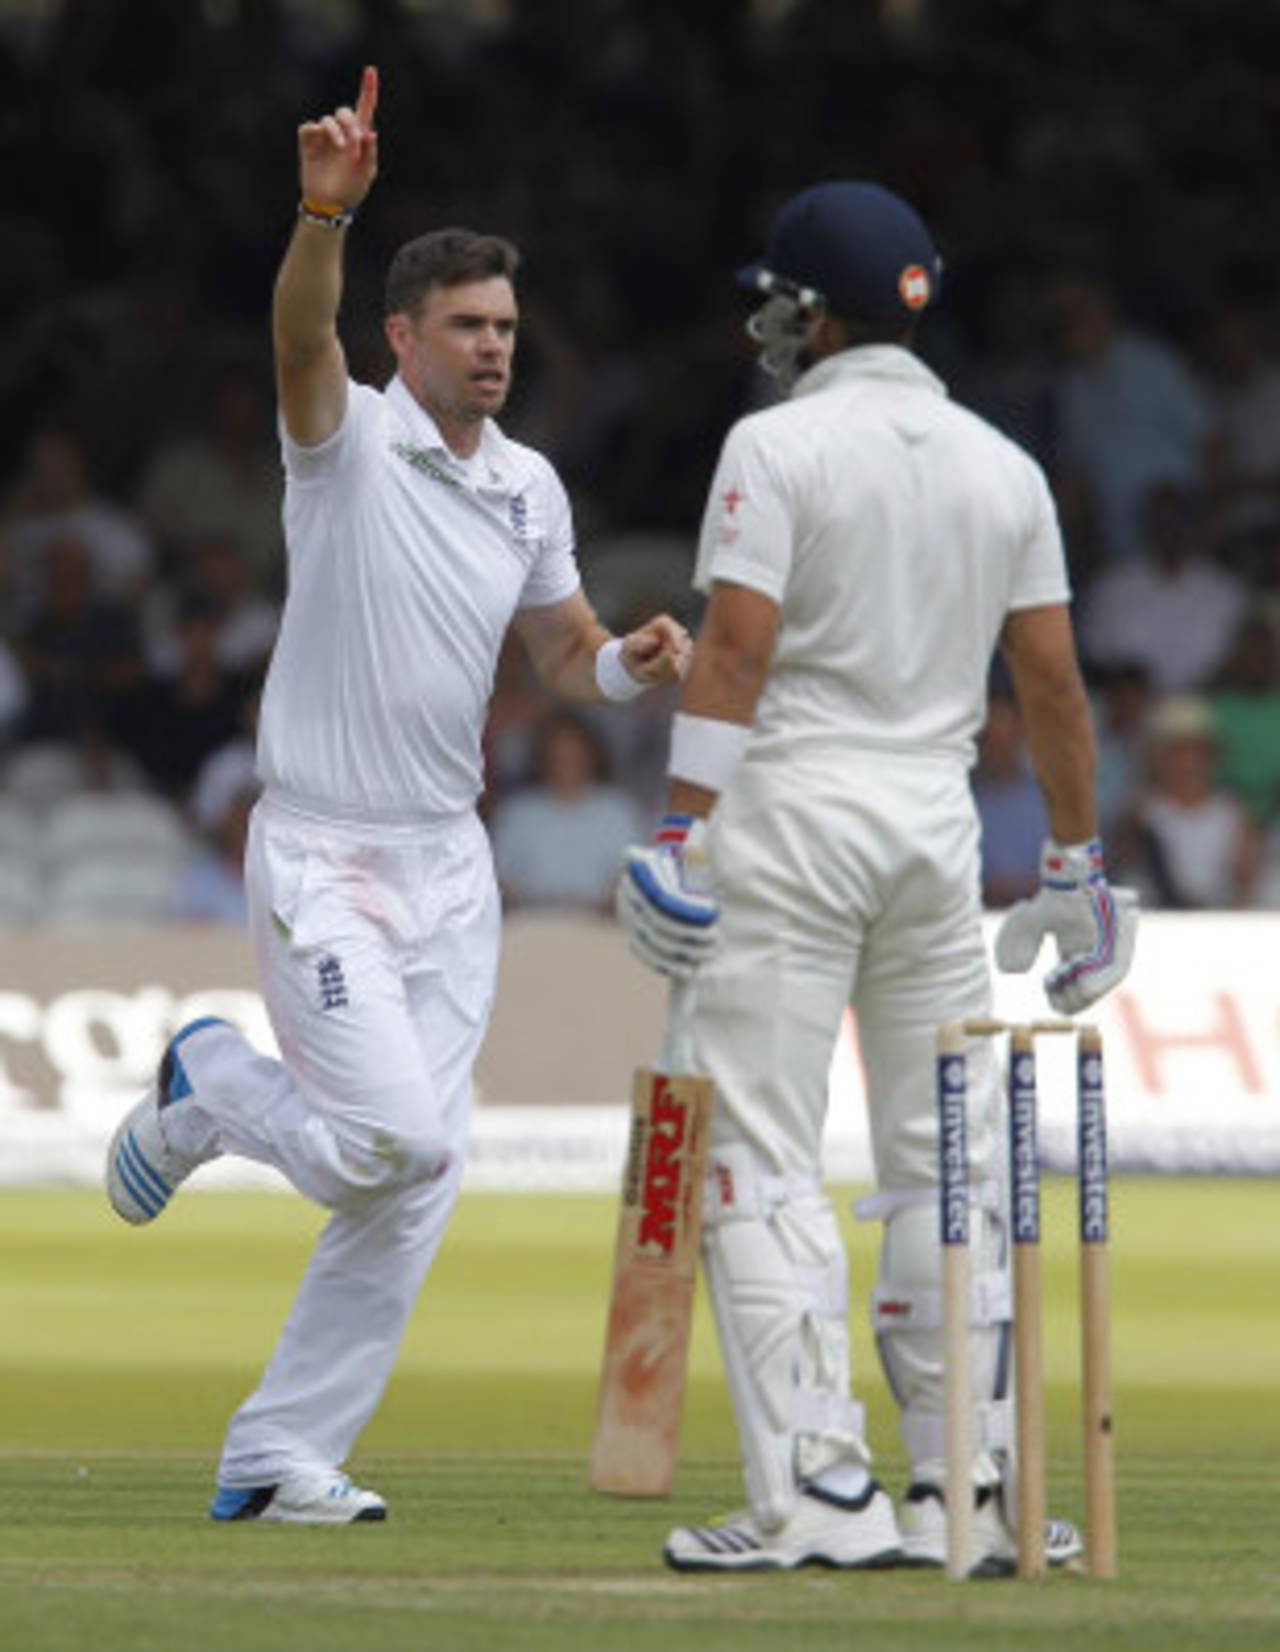 James Anderson picked up four Indian wickets, and also some big records along the way. He is now the highest wicket taker in England and at Lord's.&nbsp;&nbsp;&bull;&nbsp;&nbsp;Getty Images